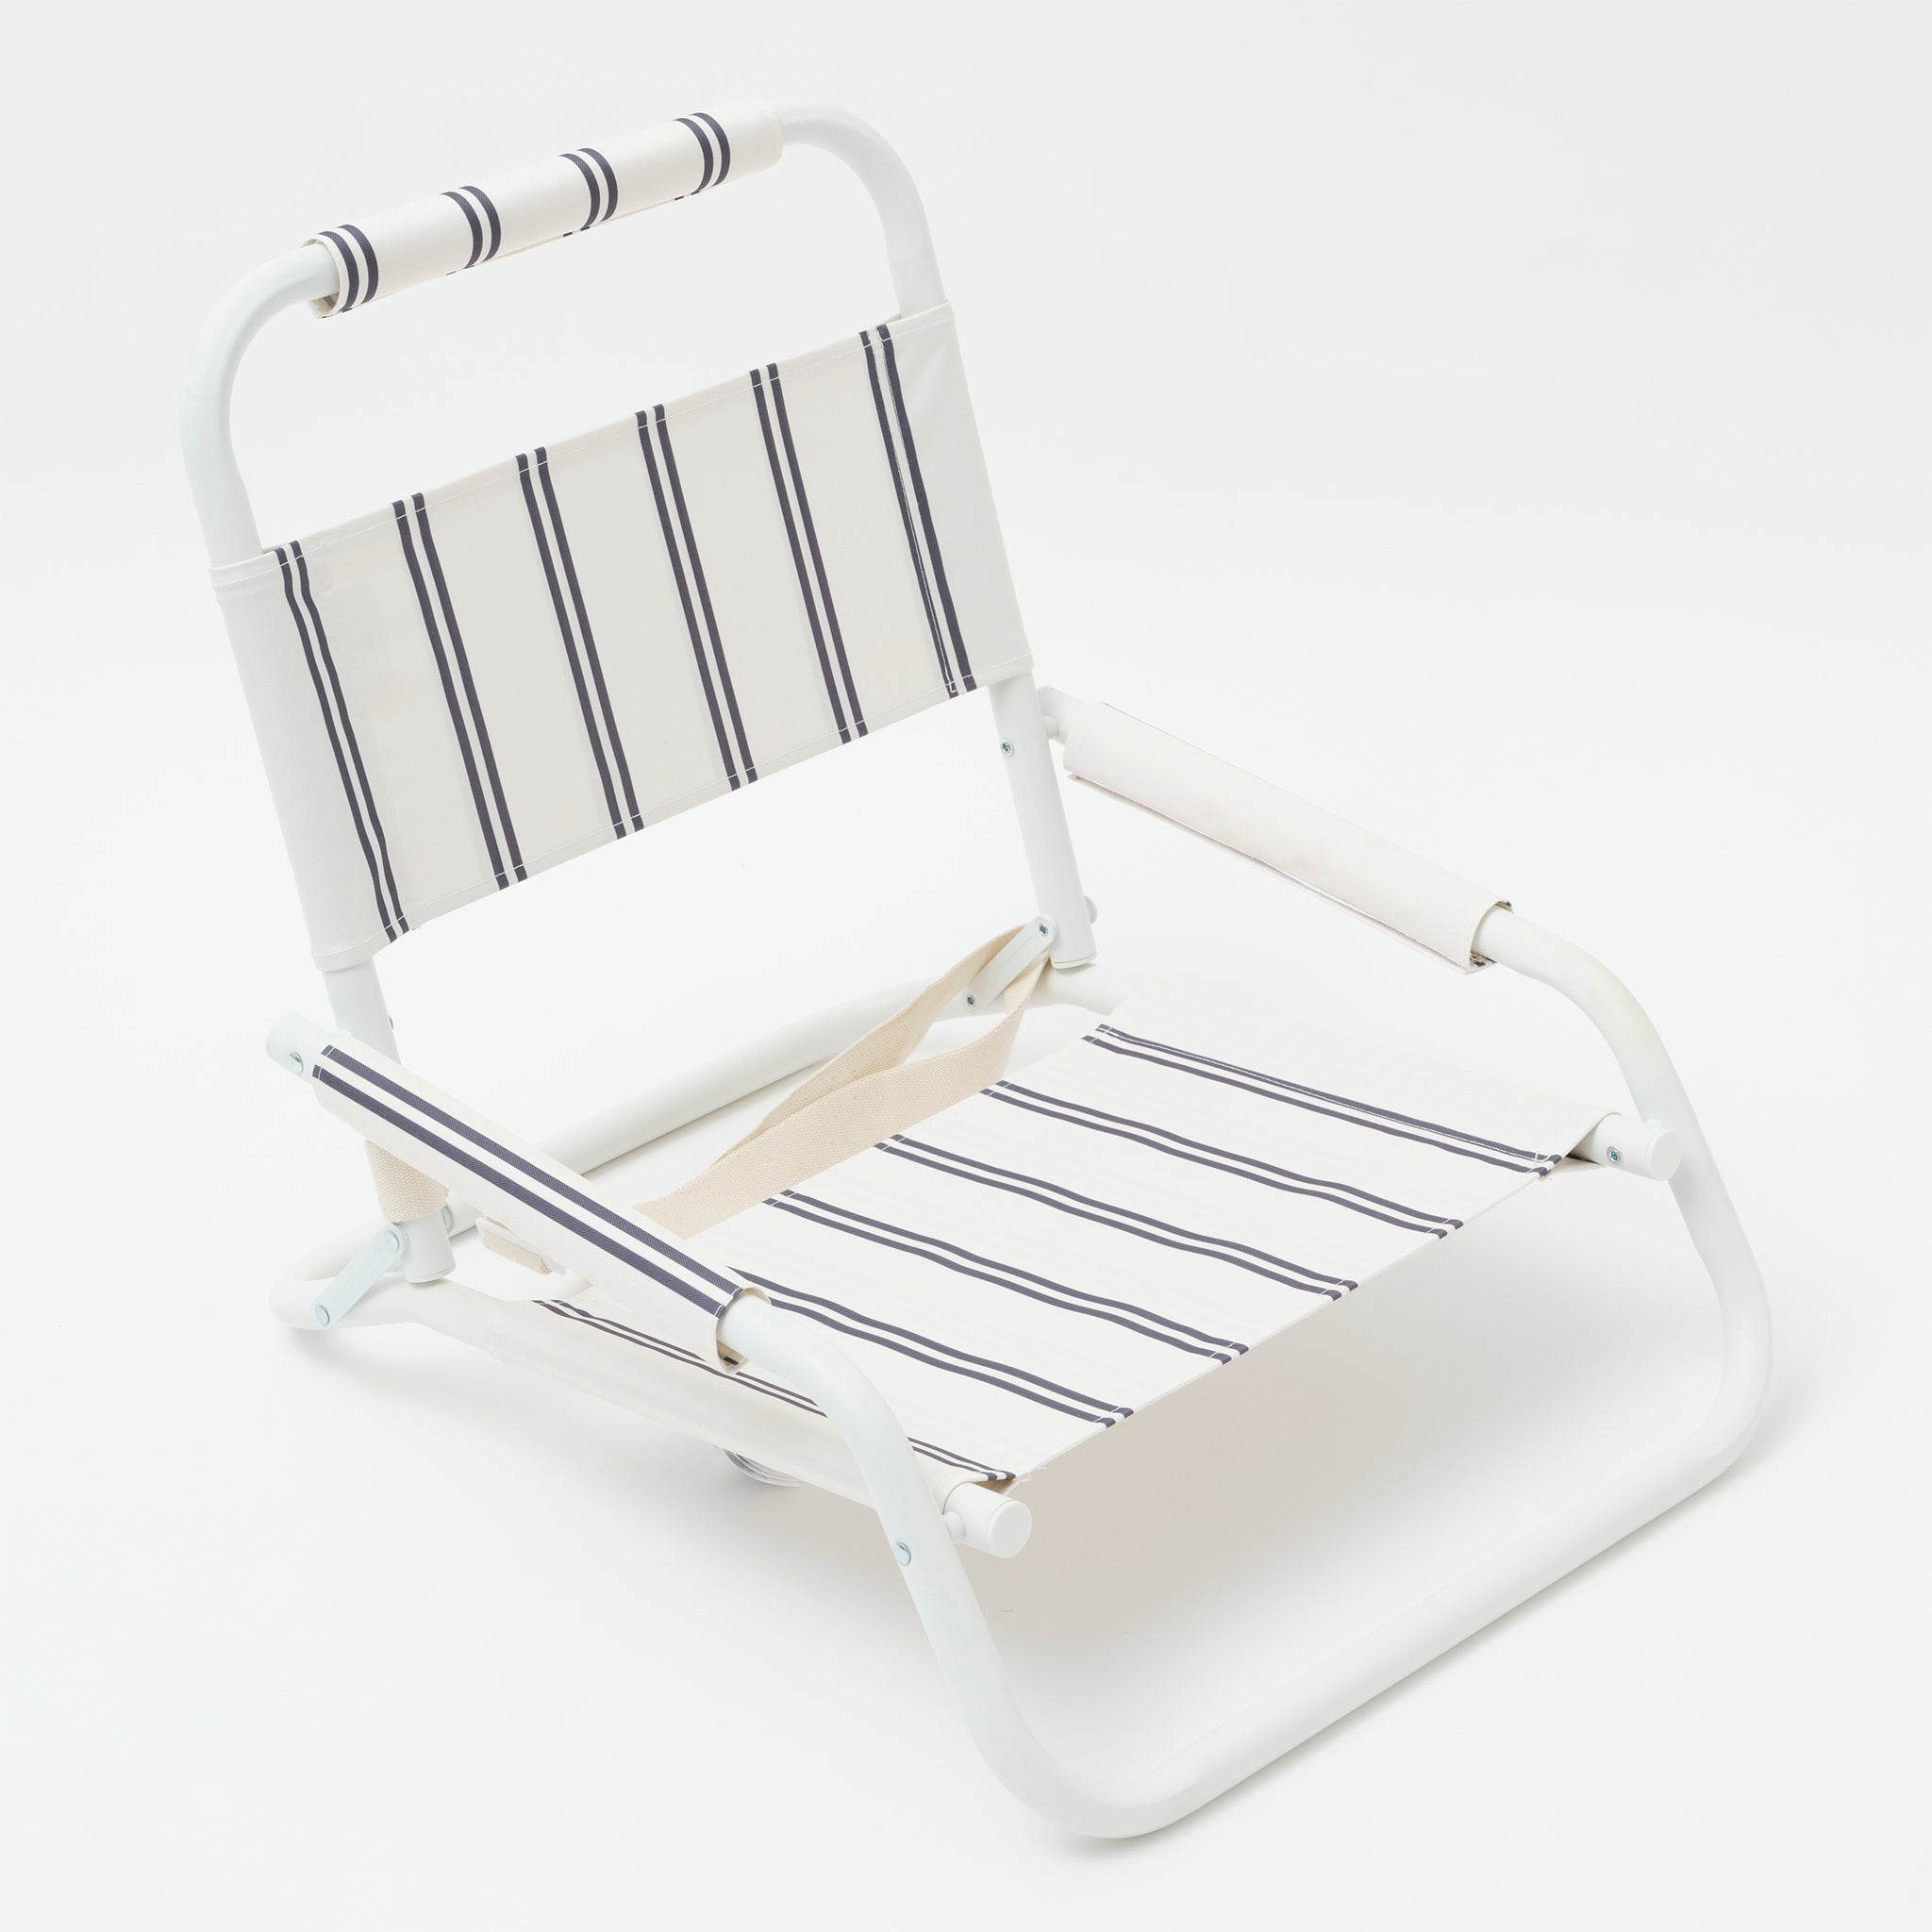 Beach Chair Charcoal Stripe-Travel & Outdoors-Sunny Life-The Bay Room